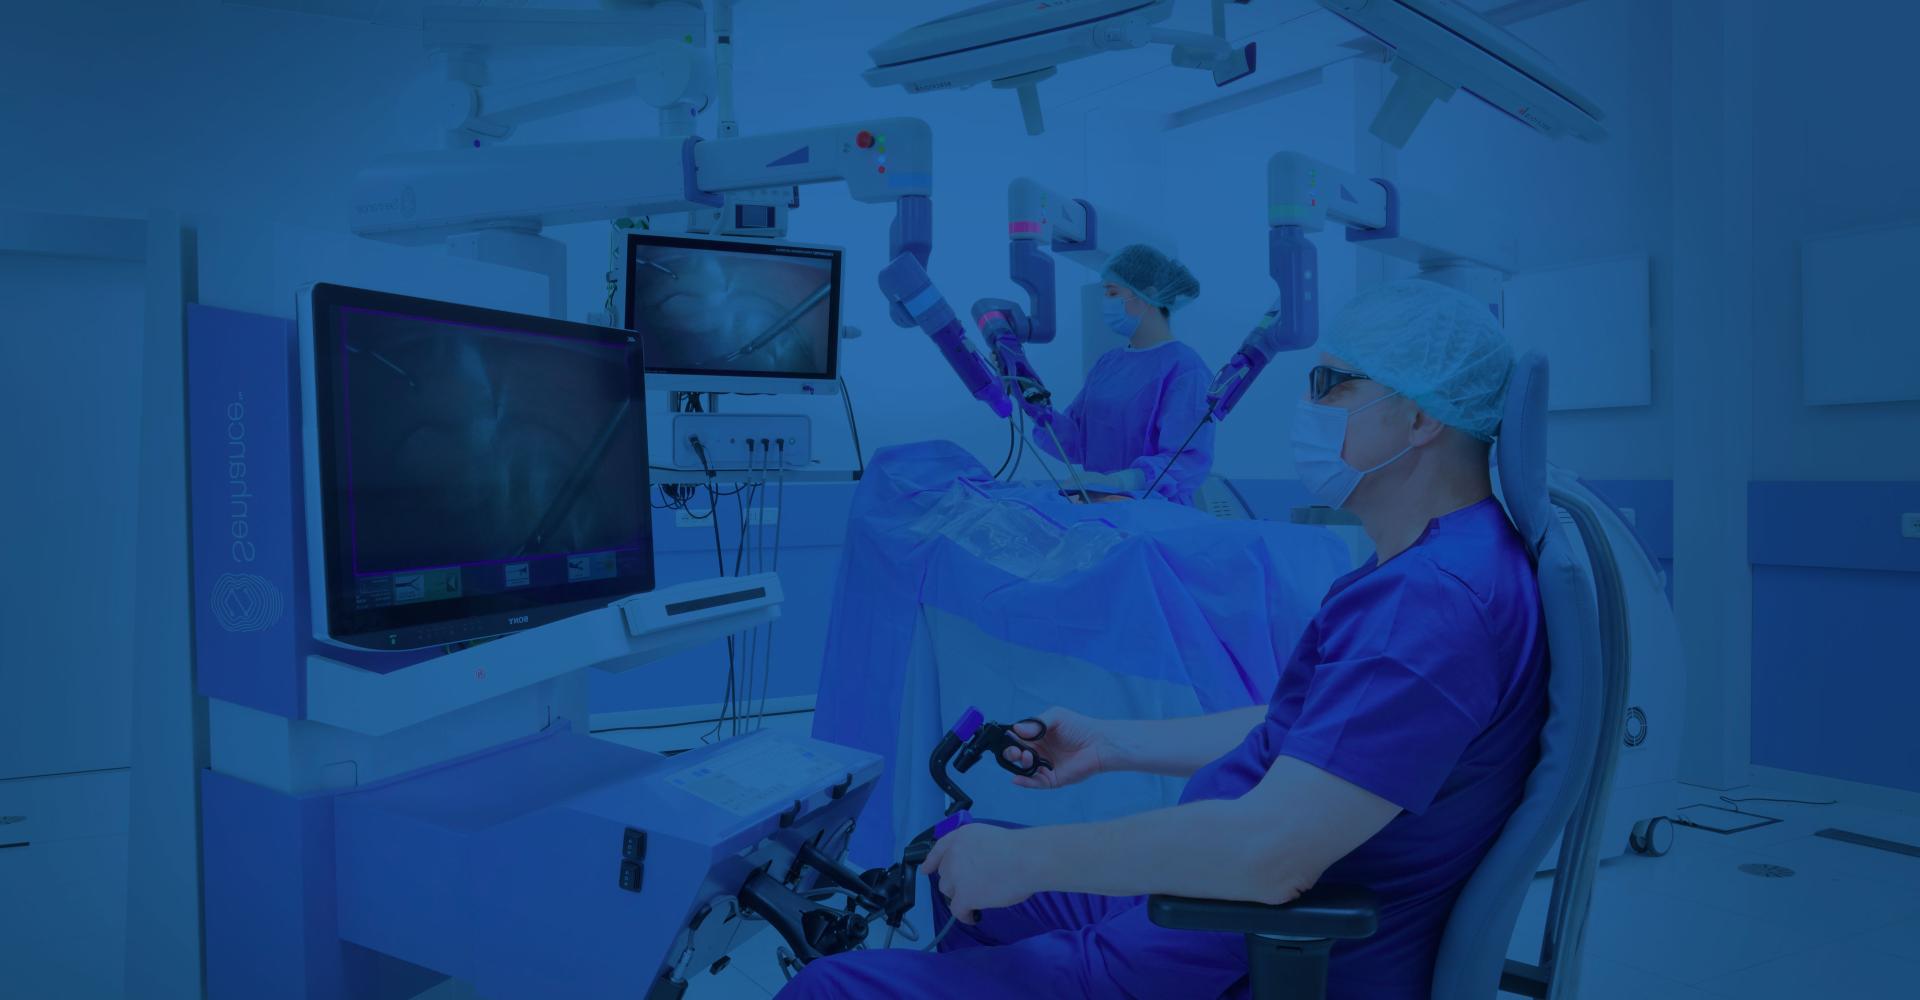 A surgeon controlling a Senhance System in a blue room